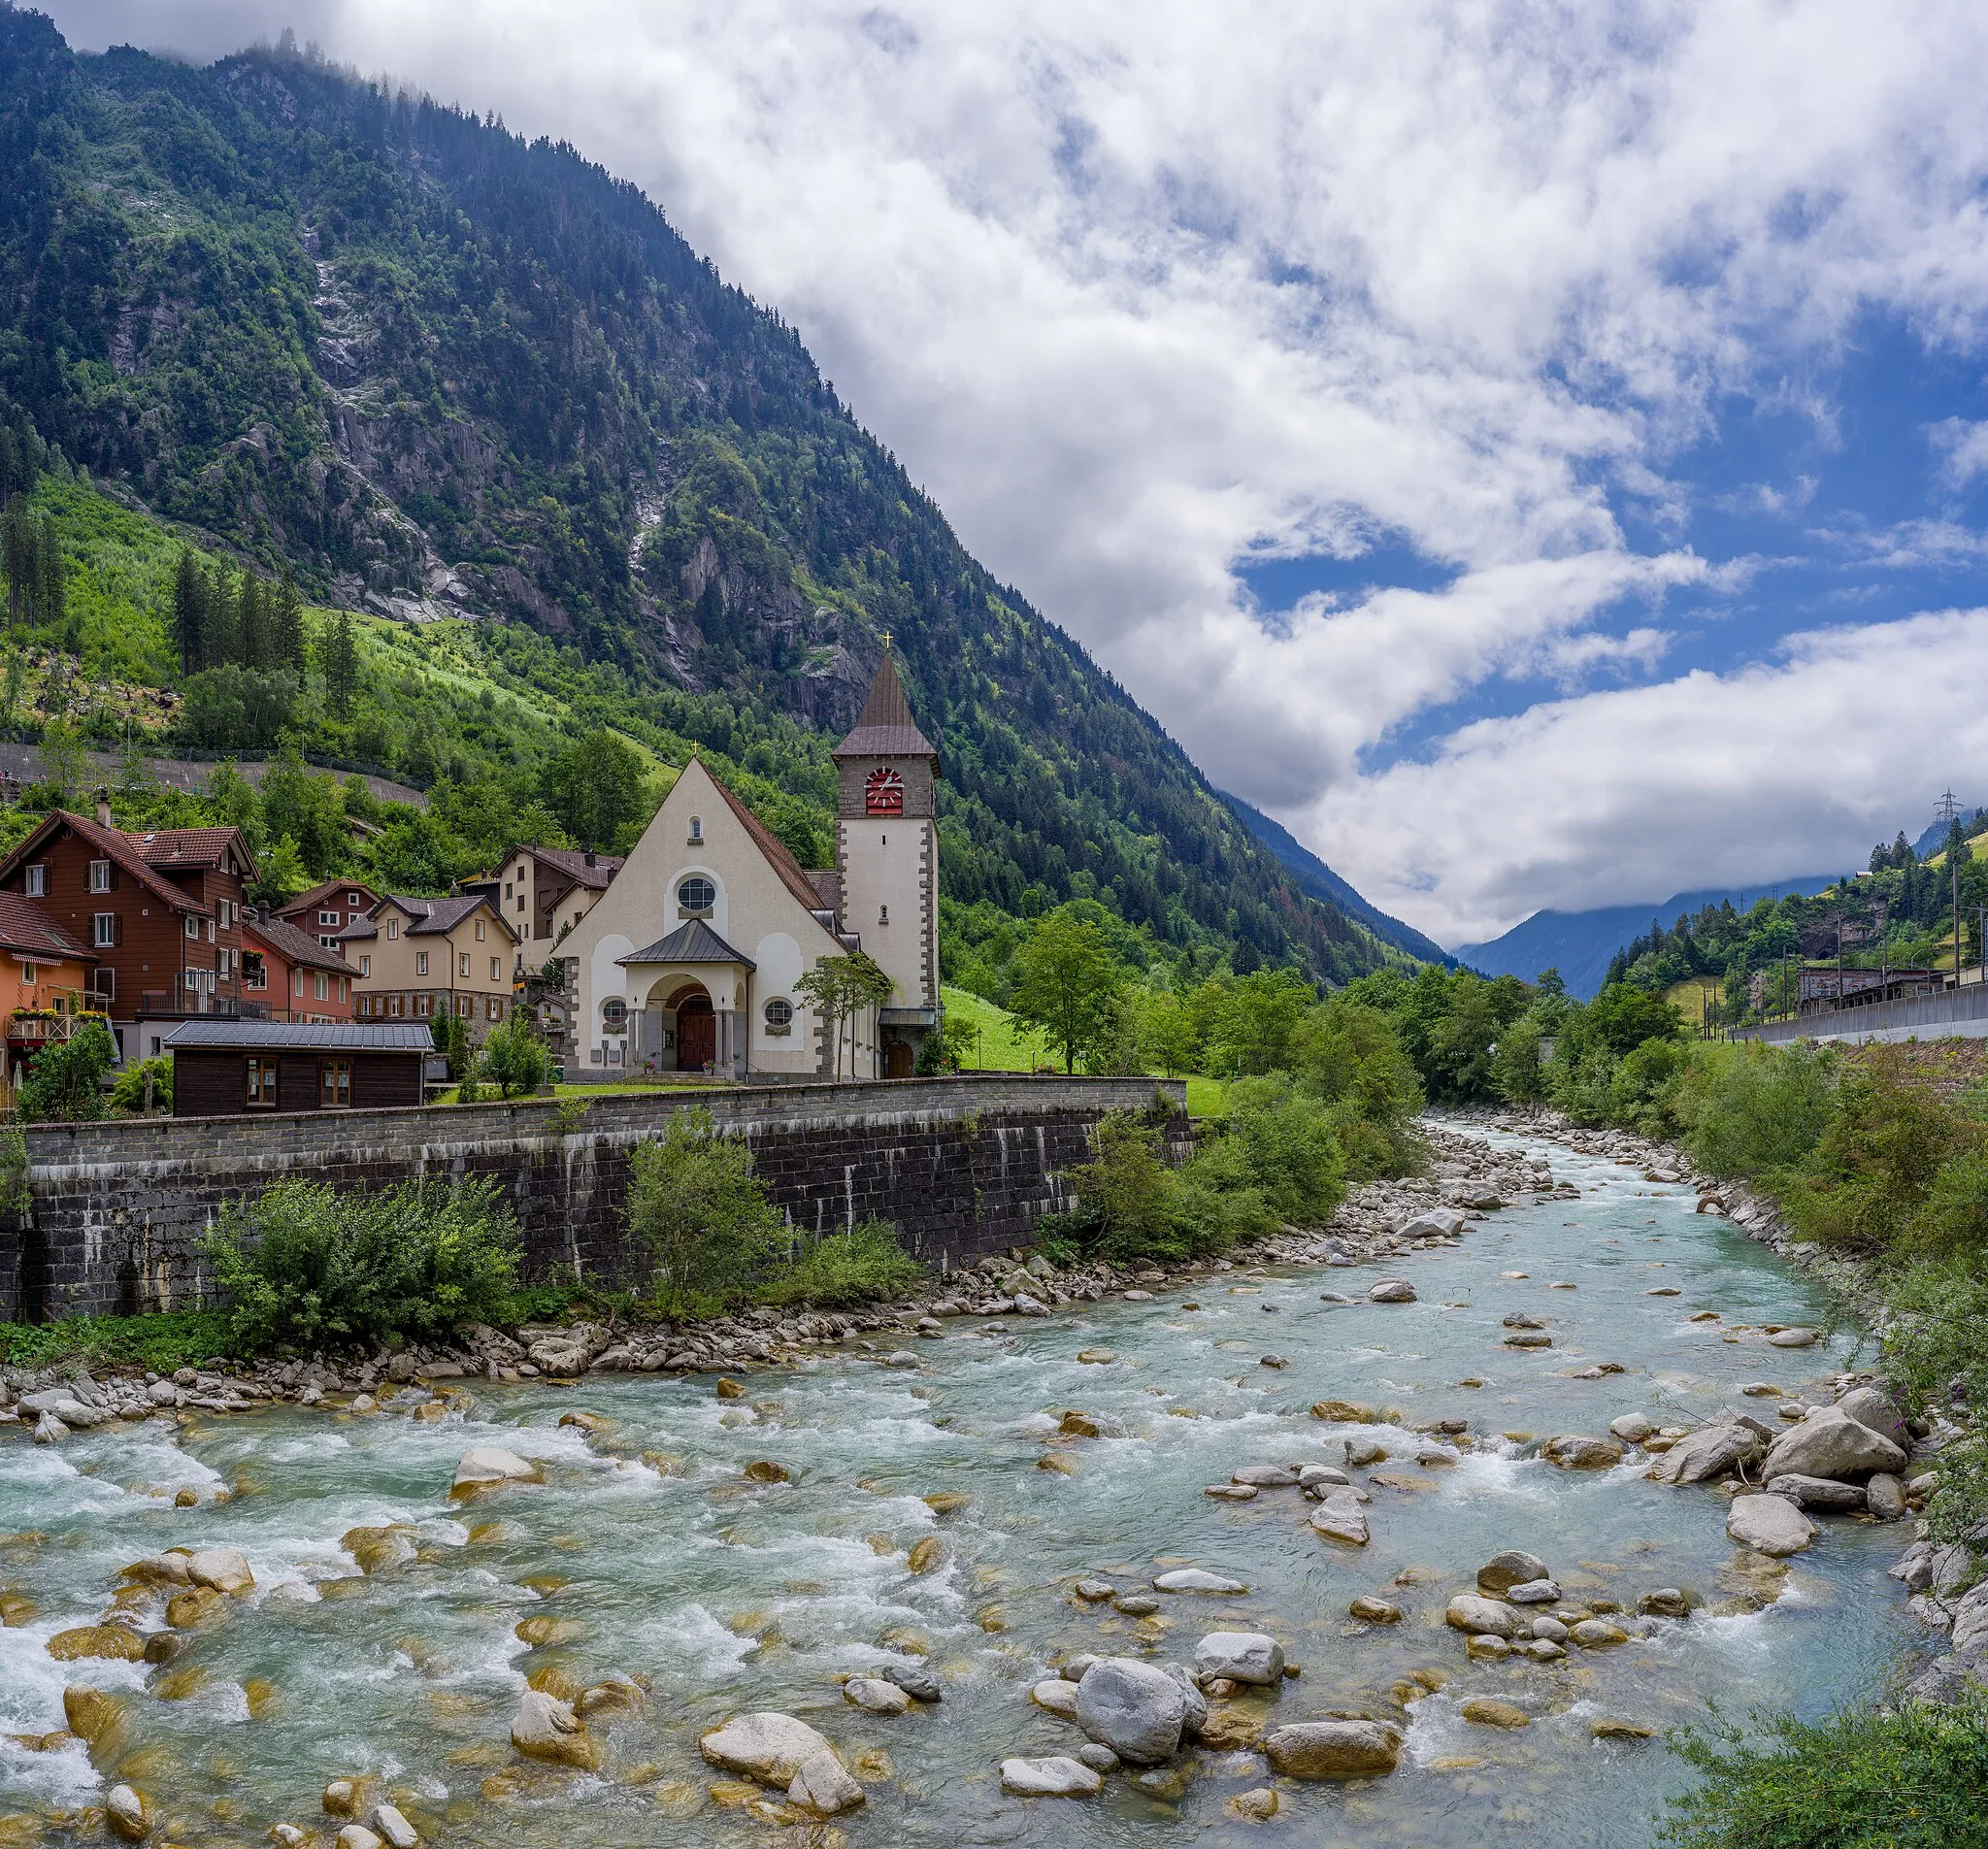 Photo showing: The Saint Joseph church and the Reuss river in Switzerland.